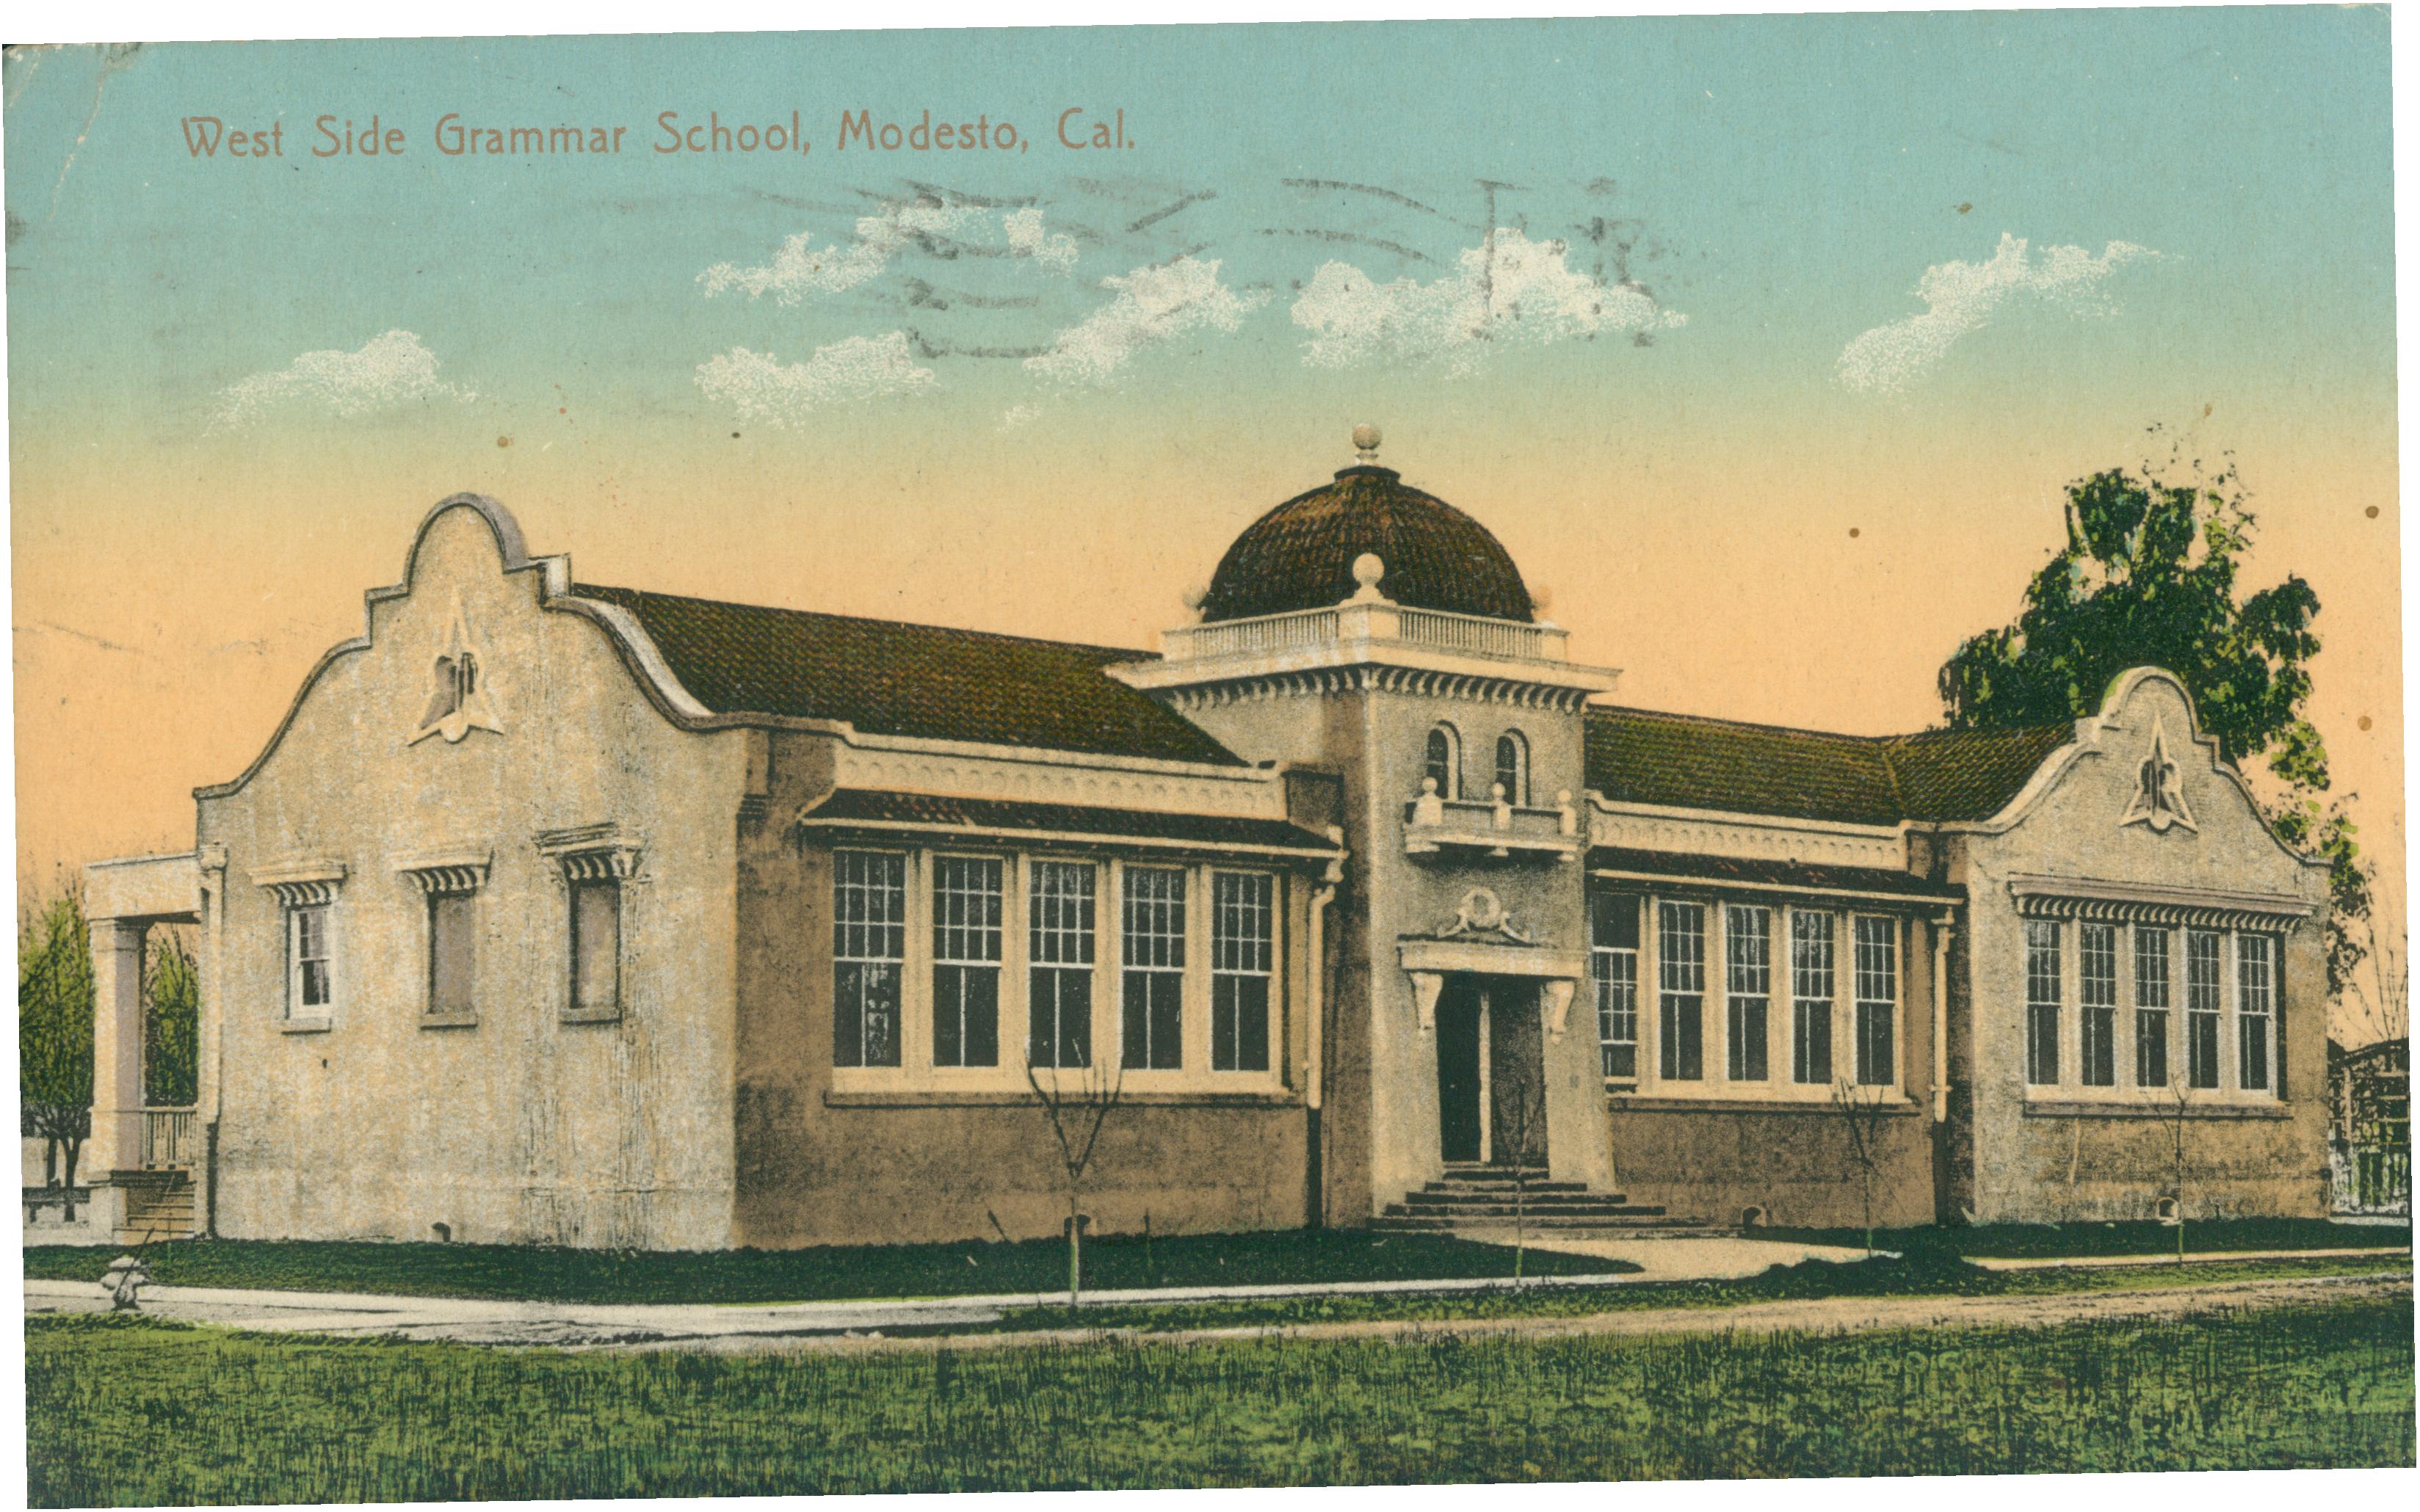 Shows a corner view of the West Side Grammar School